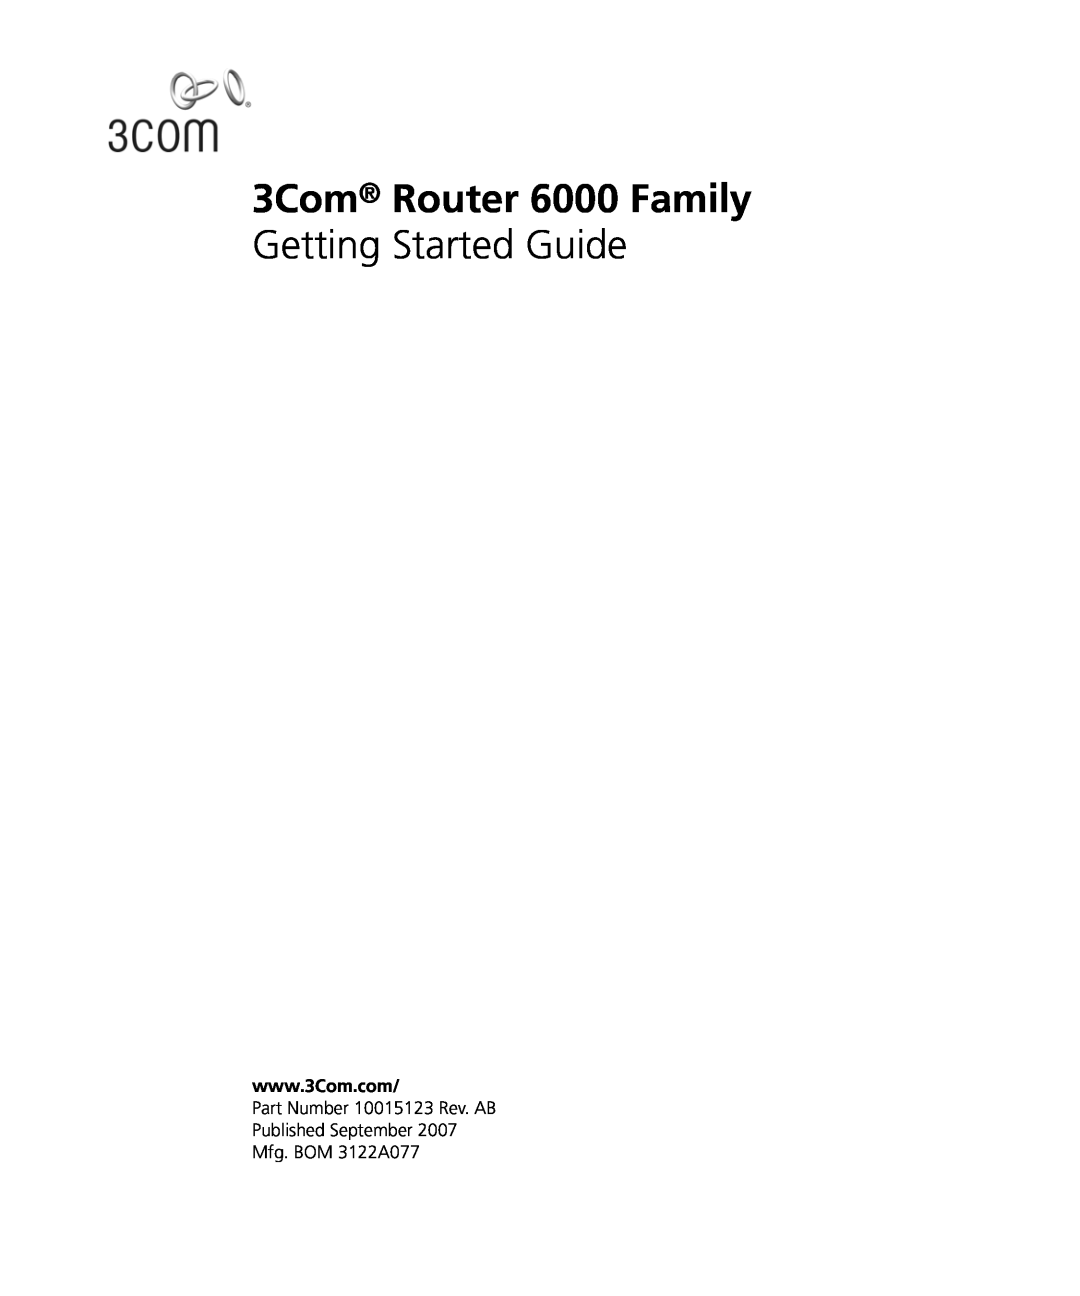 3Com manual 3Com Router 6000 Family, Getting Started Guide 